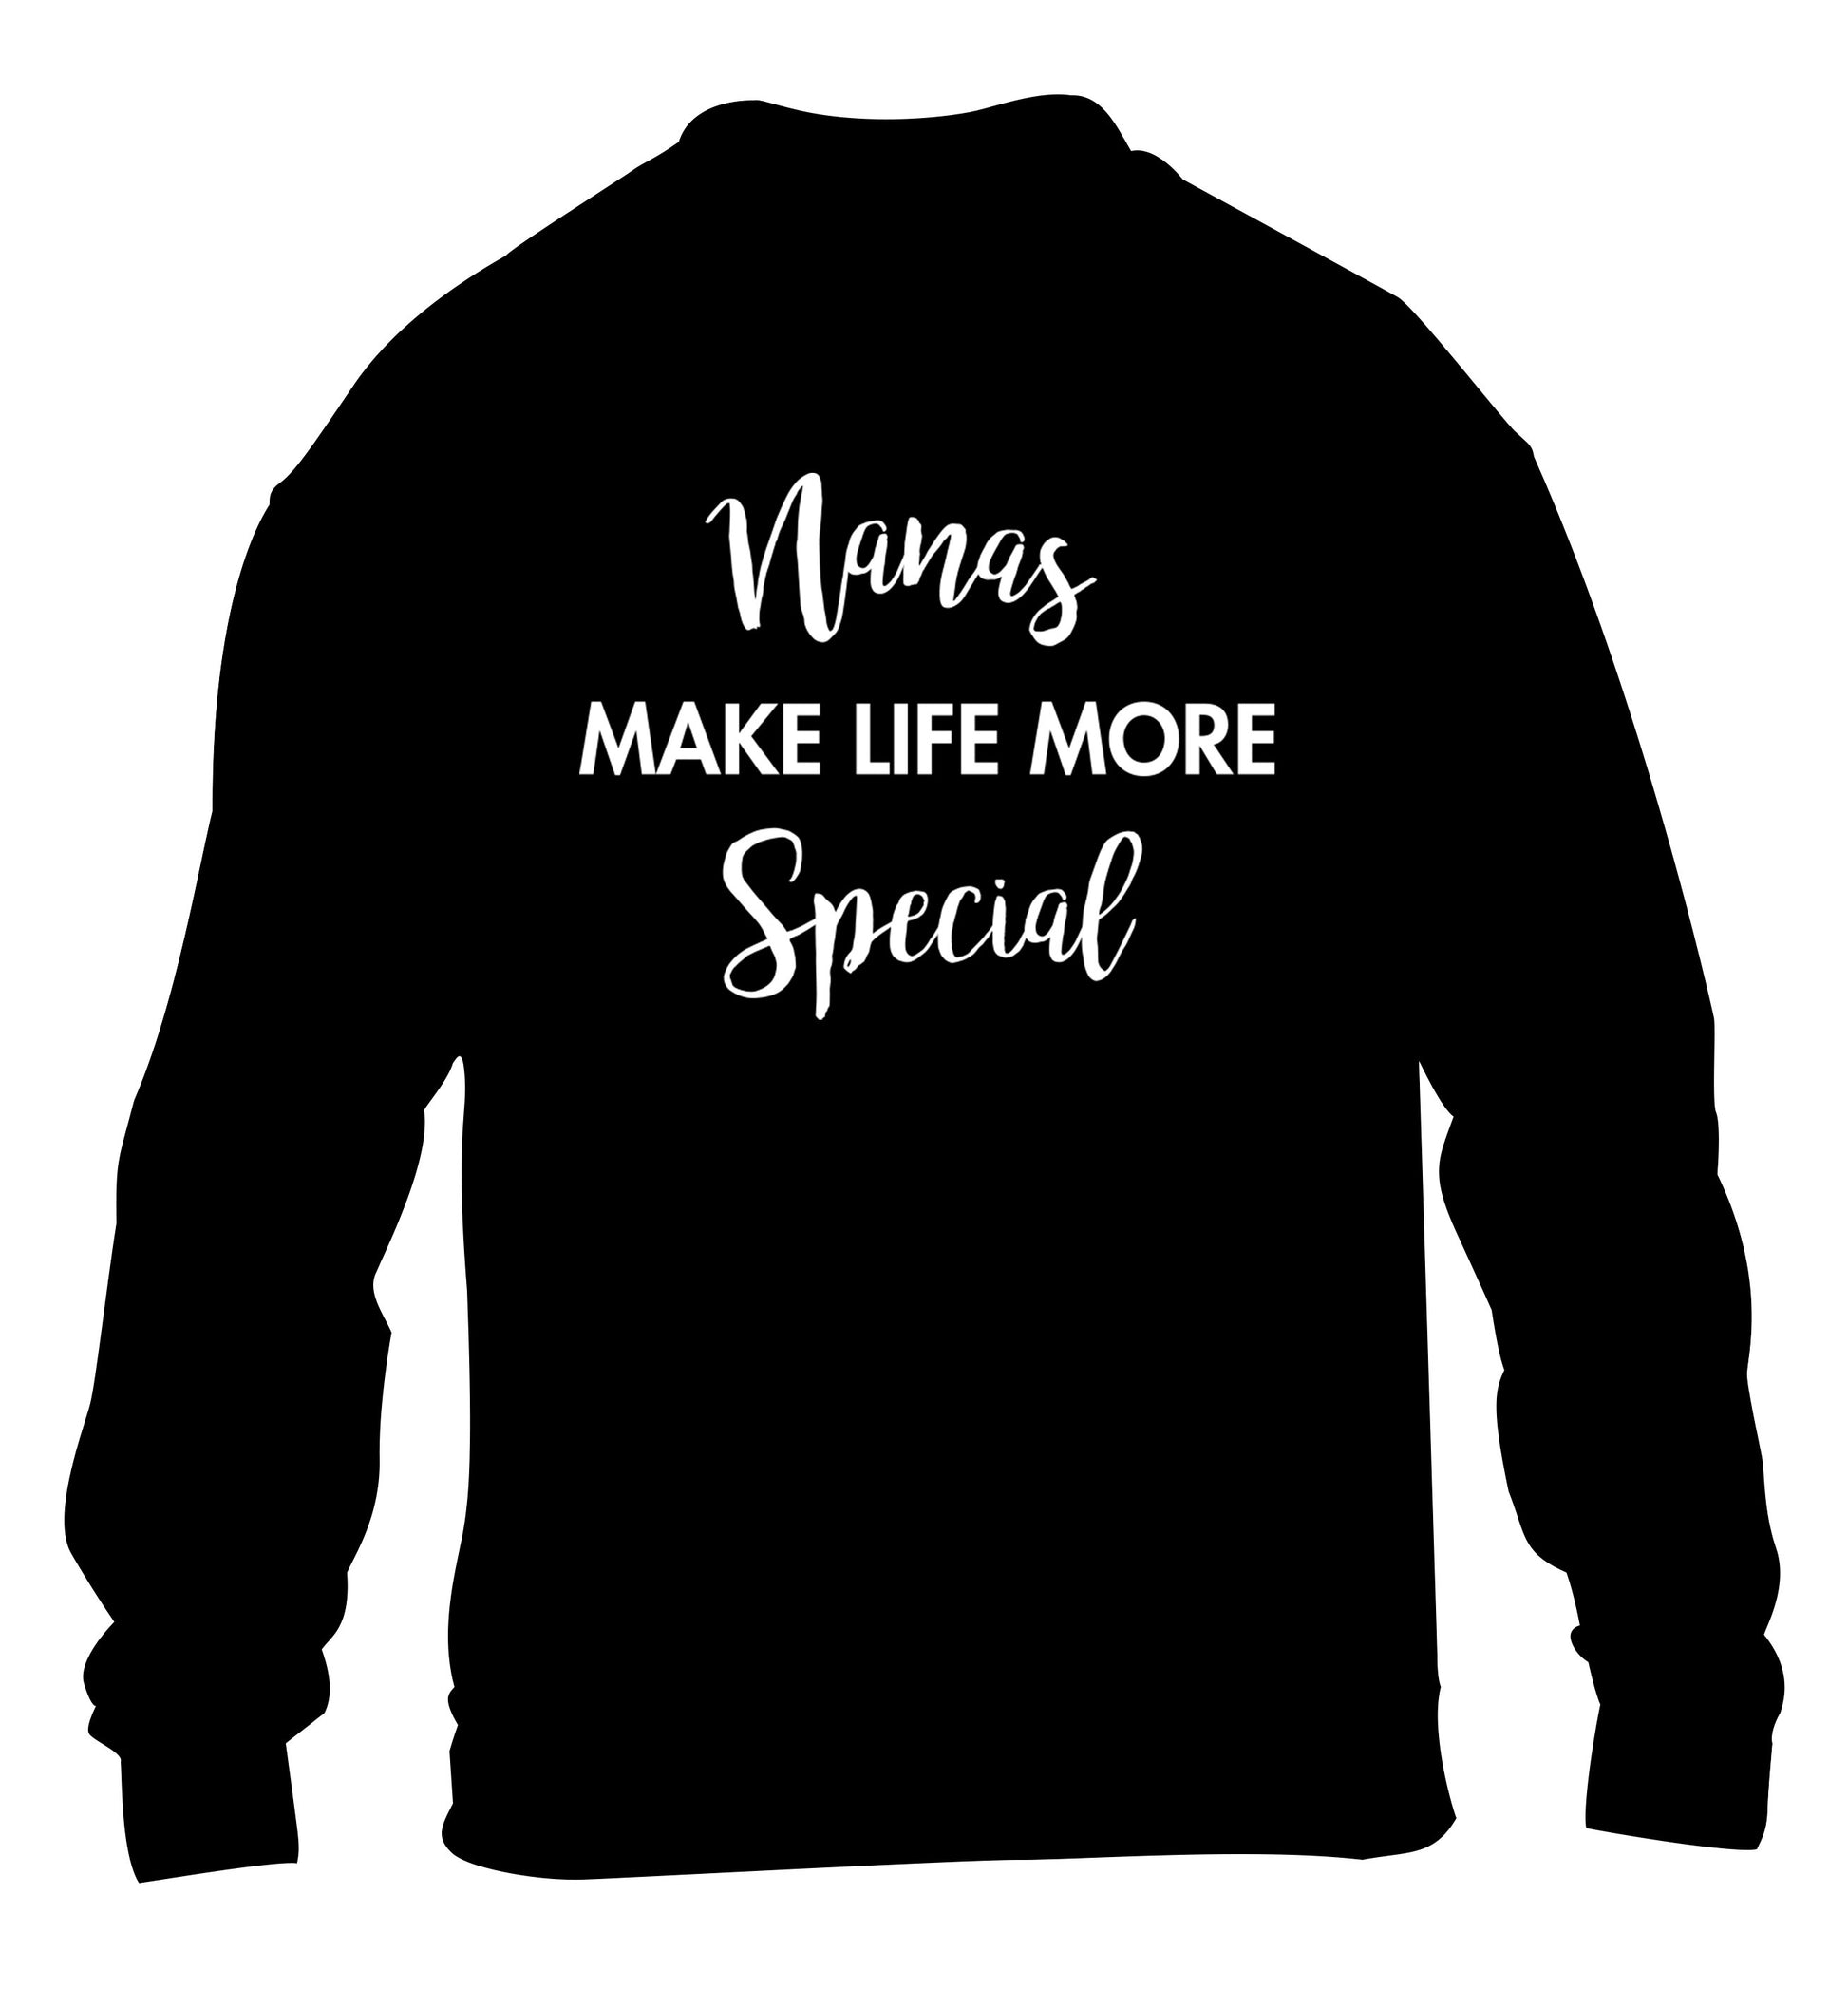 Nanas make life more special children's black sweater 12-14 Years